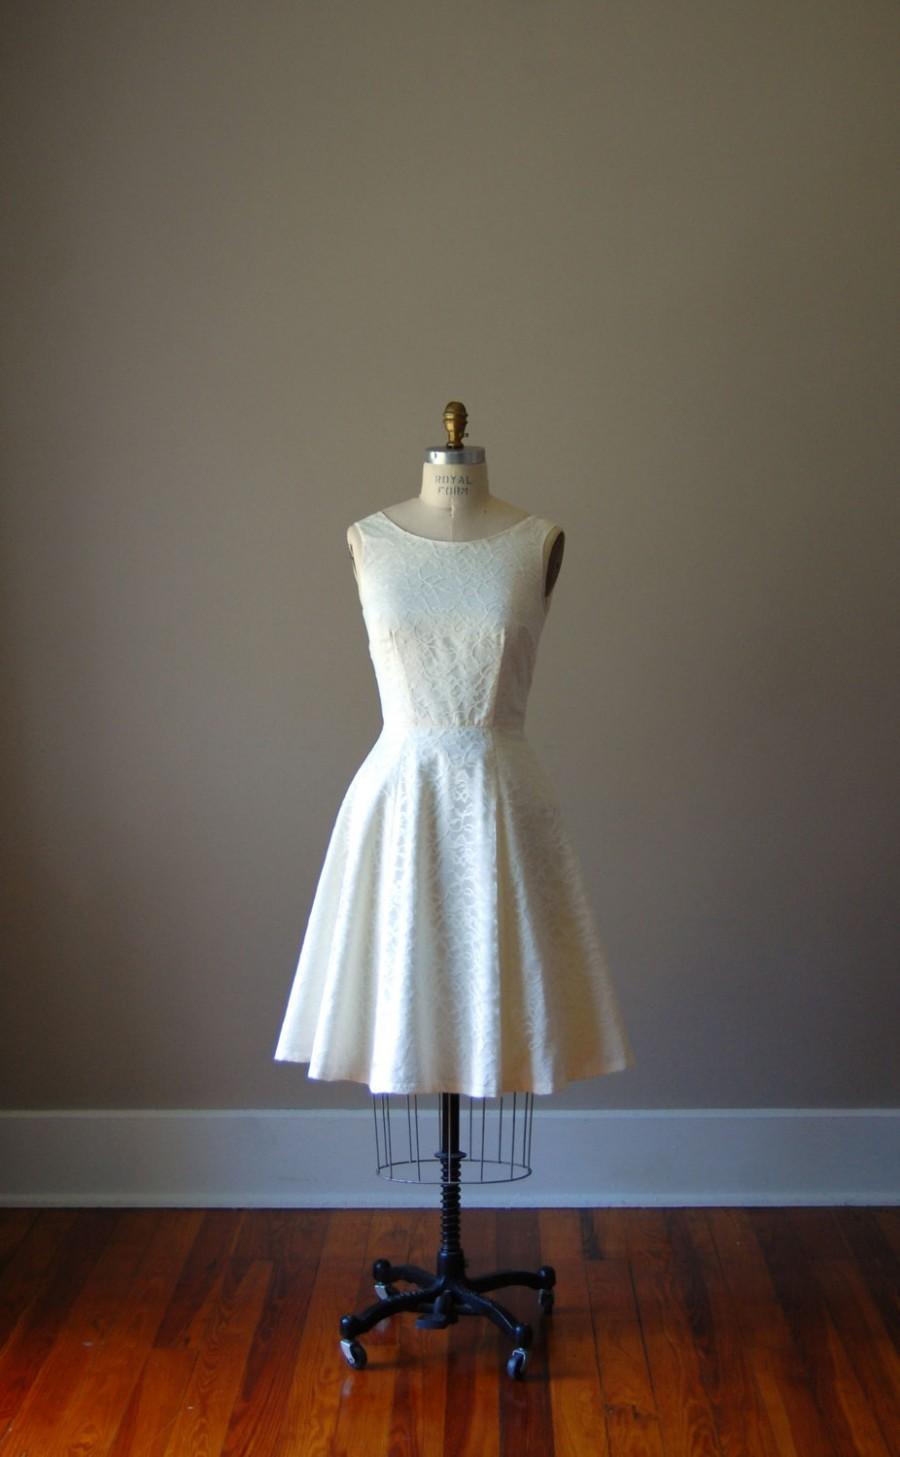 Hochzeit - Ivory Cotton and Lace Cocktail Dress with Scoop Neck and Full Skirt / Bridesmaid/ Wedding / Knee Length / Circle Skirt / Scoop Back / Cream